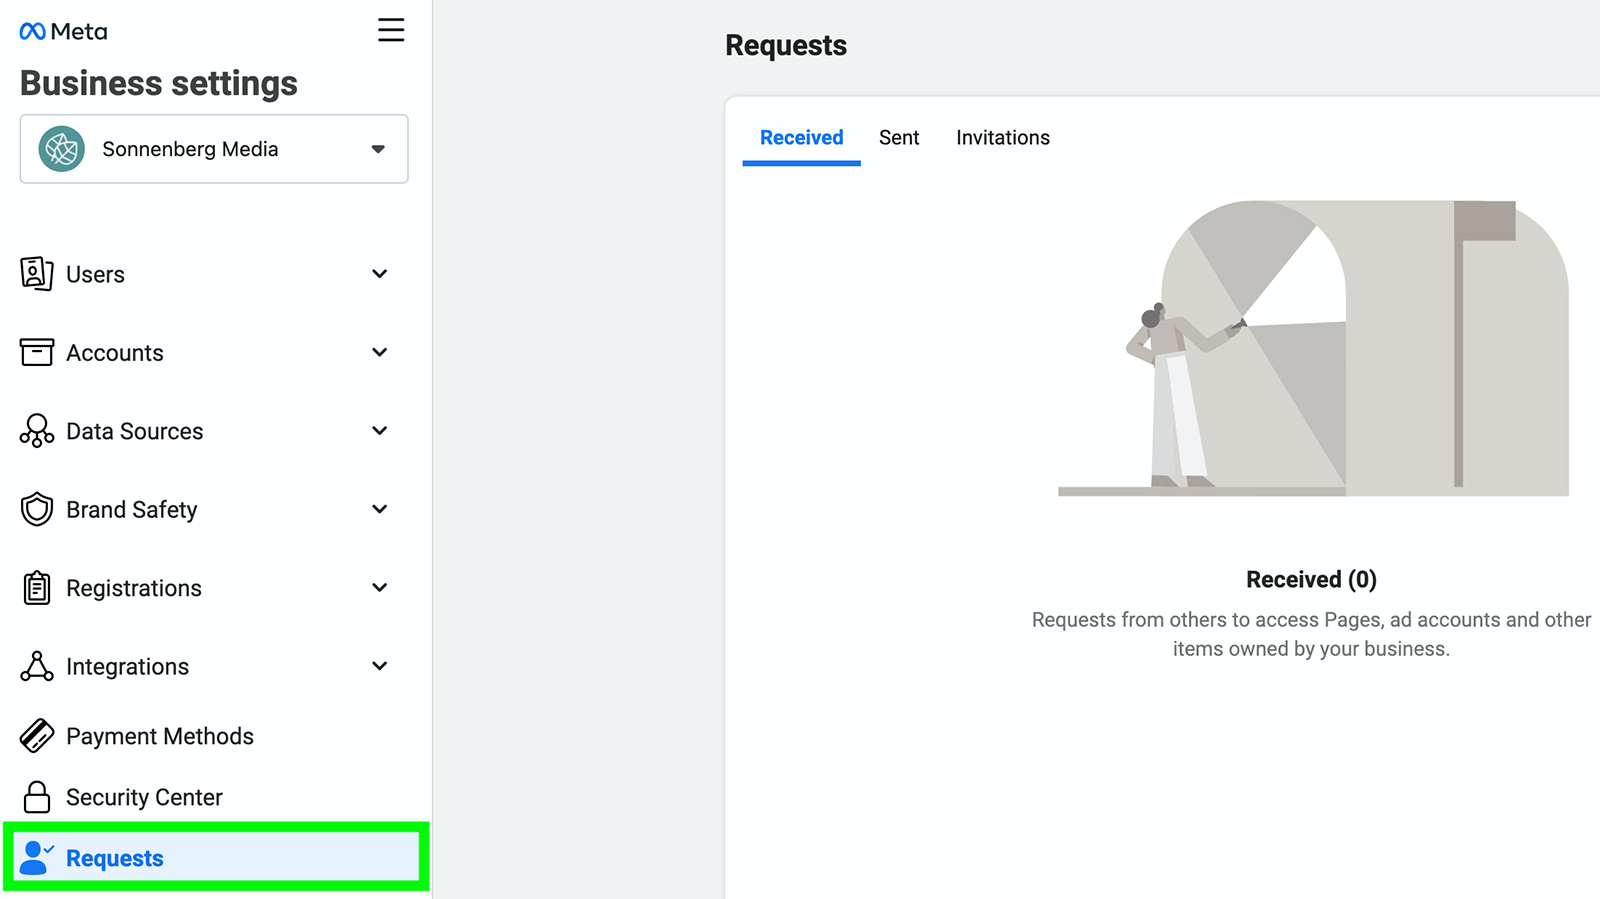 image of Requests tab in Meta Business Settings